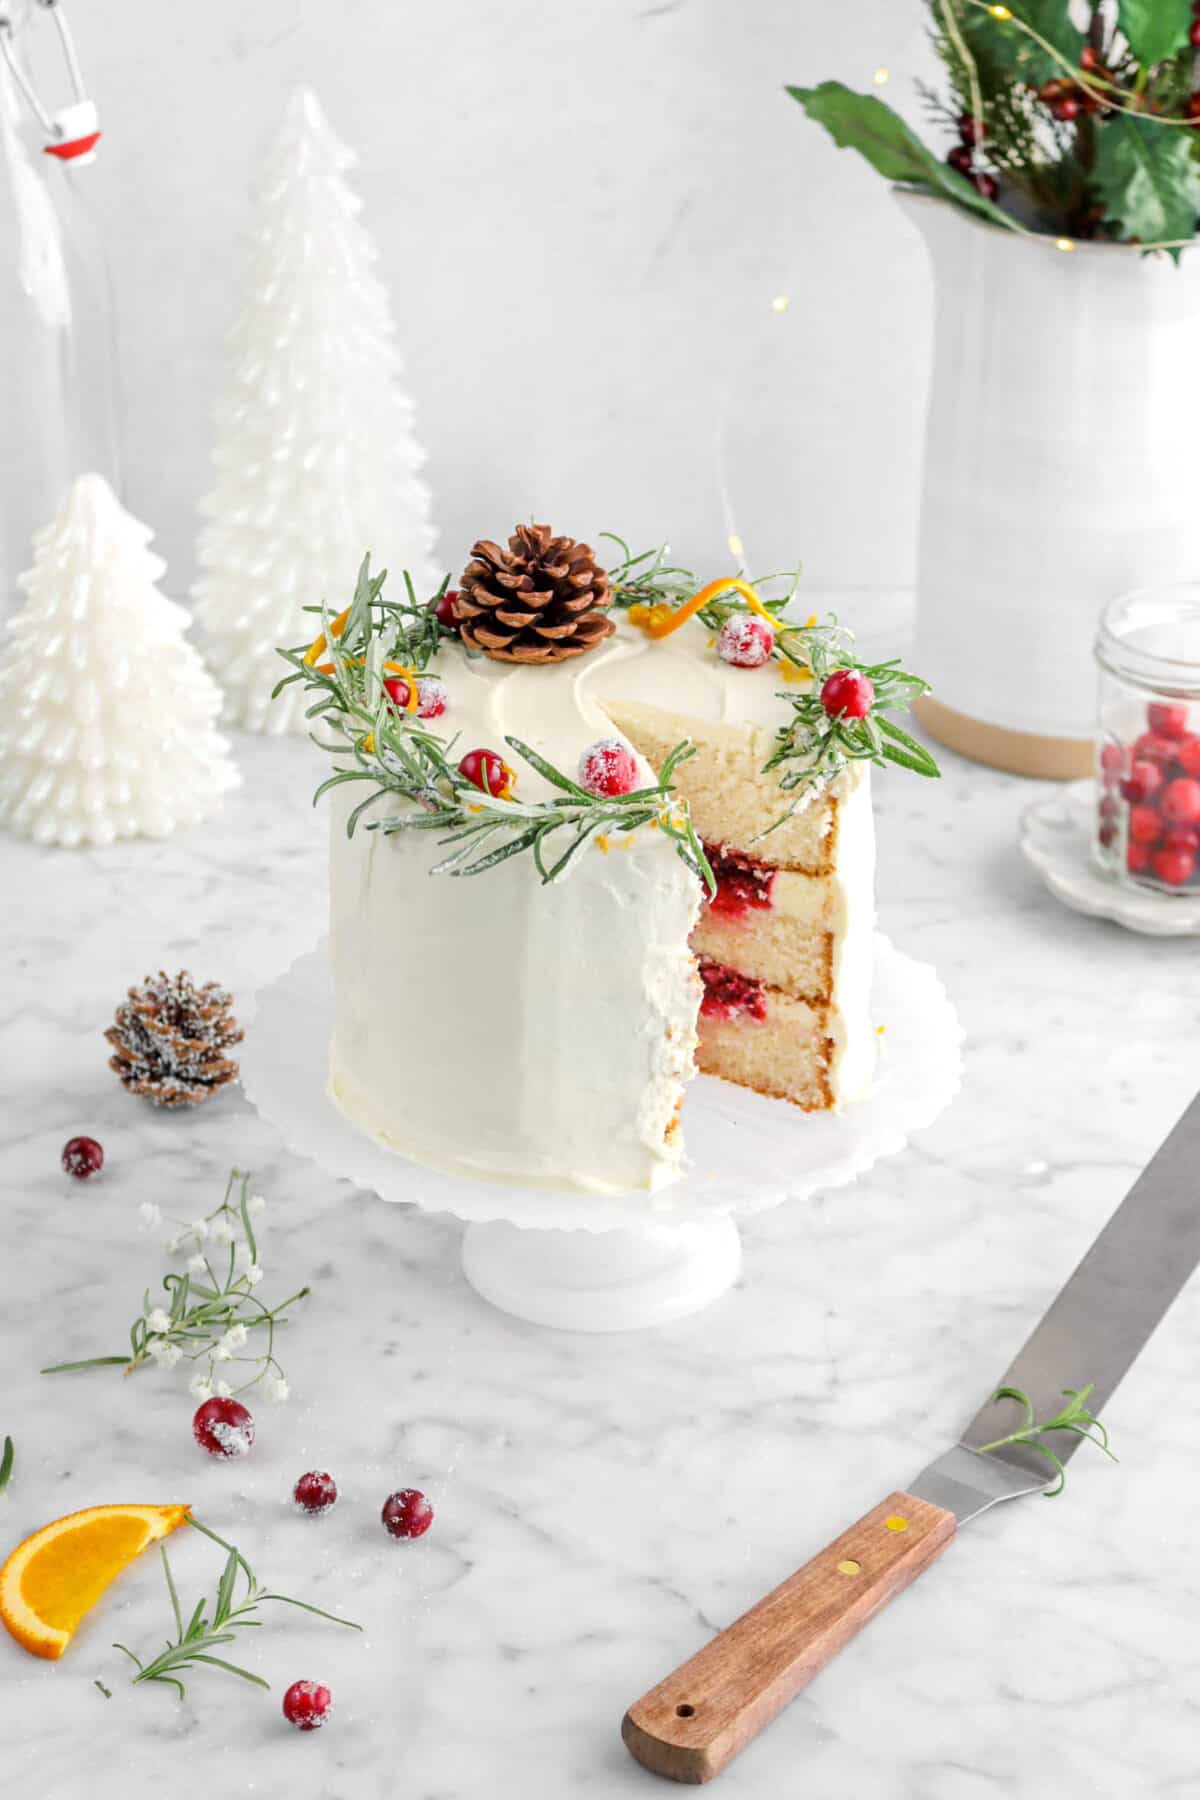 white cake with cranberry filling on cake plate with slice missing, offset spatula beside, jar of cranberries, flowers, rosemary sprigs around, and two white christmas trees behind